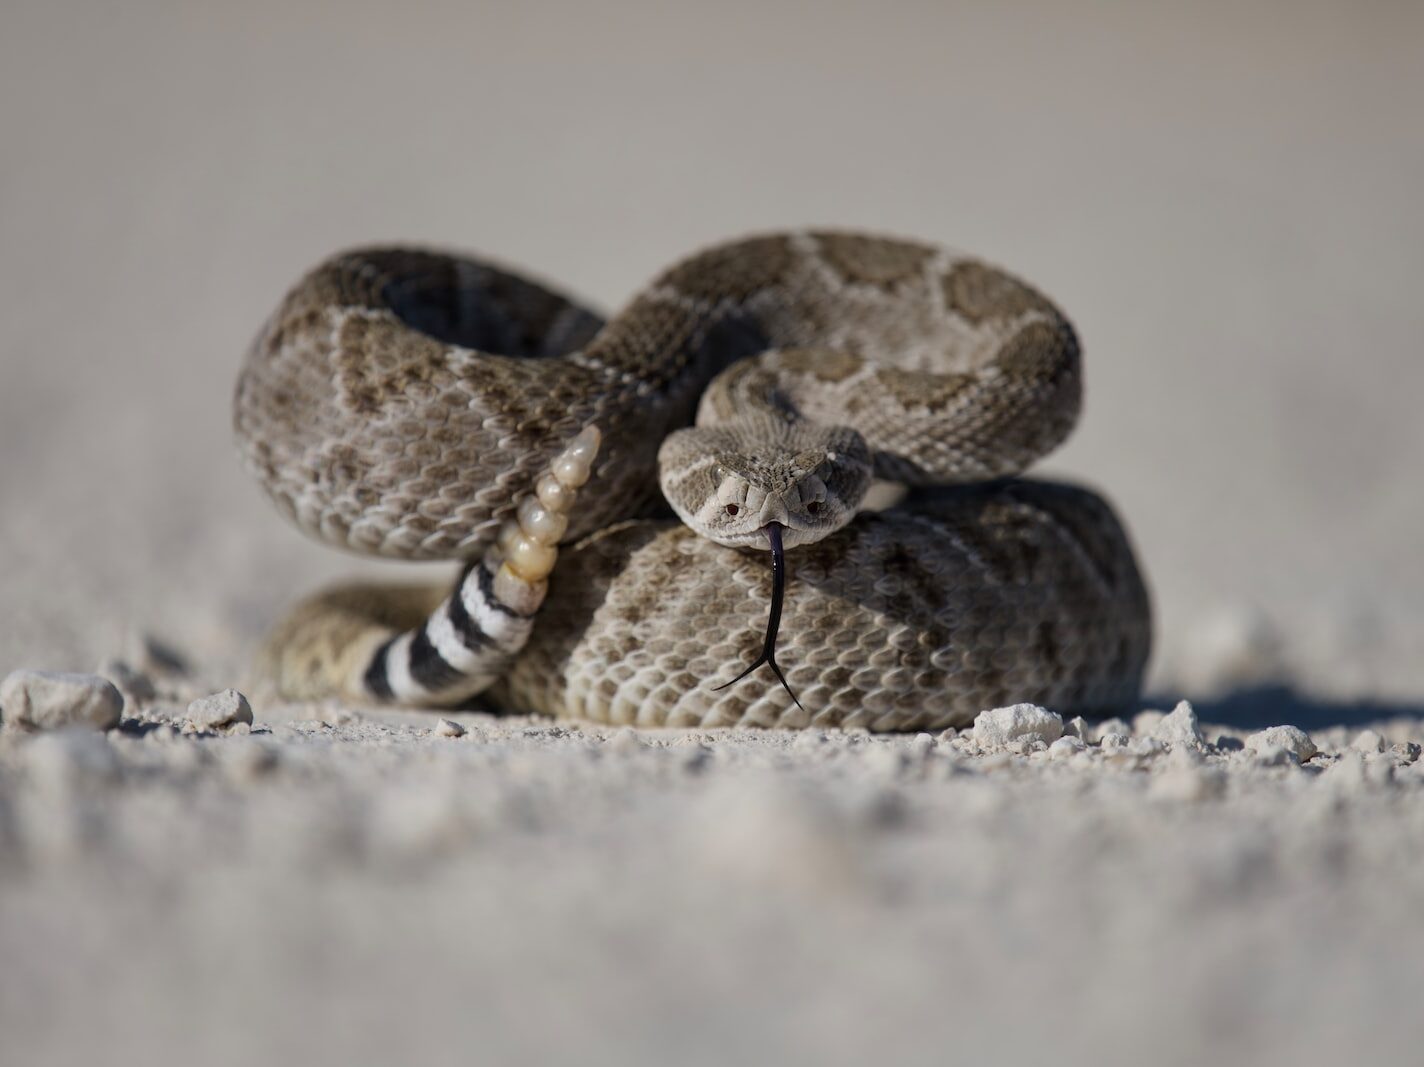 brown and black snake on white sand